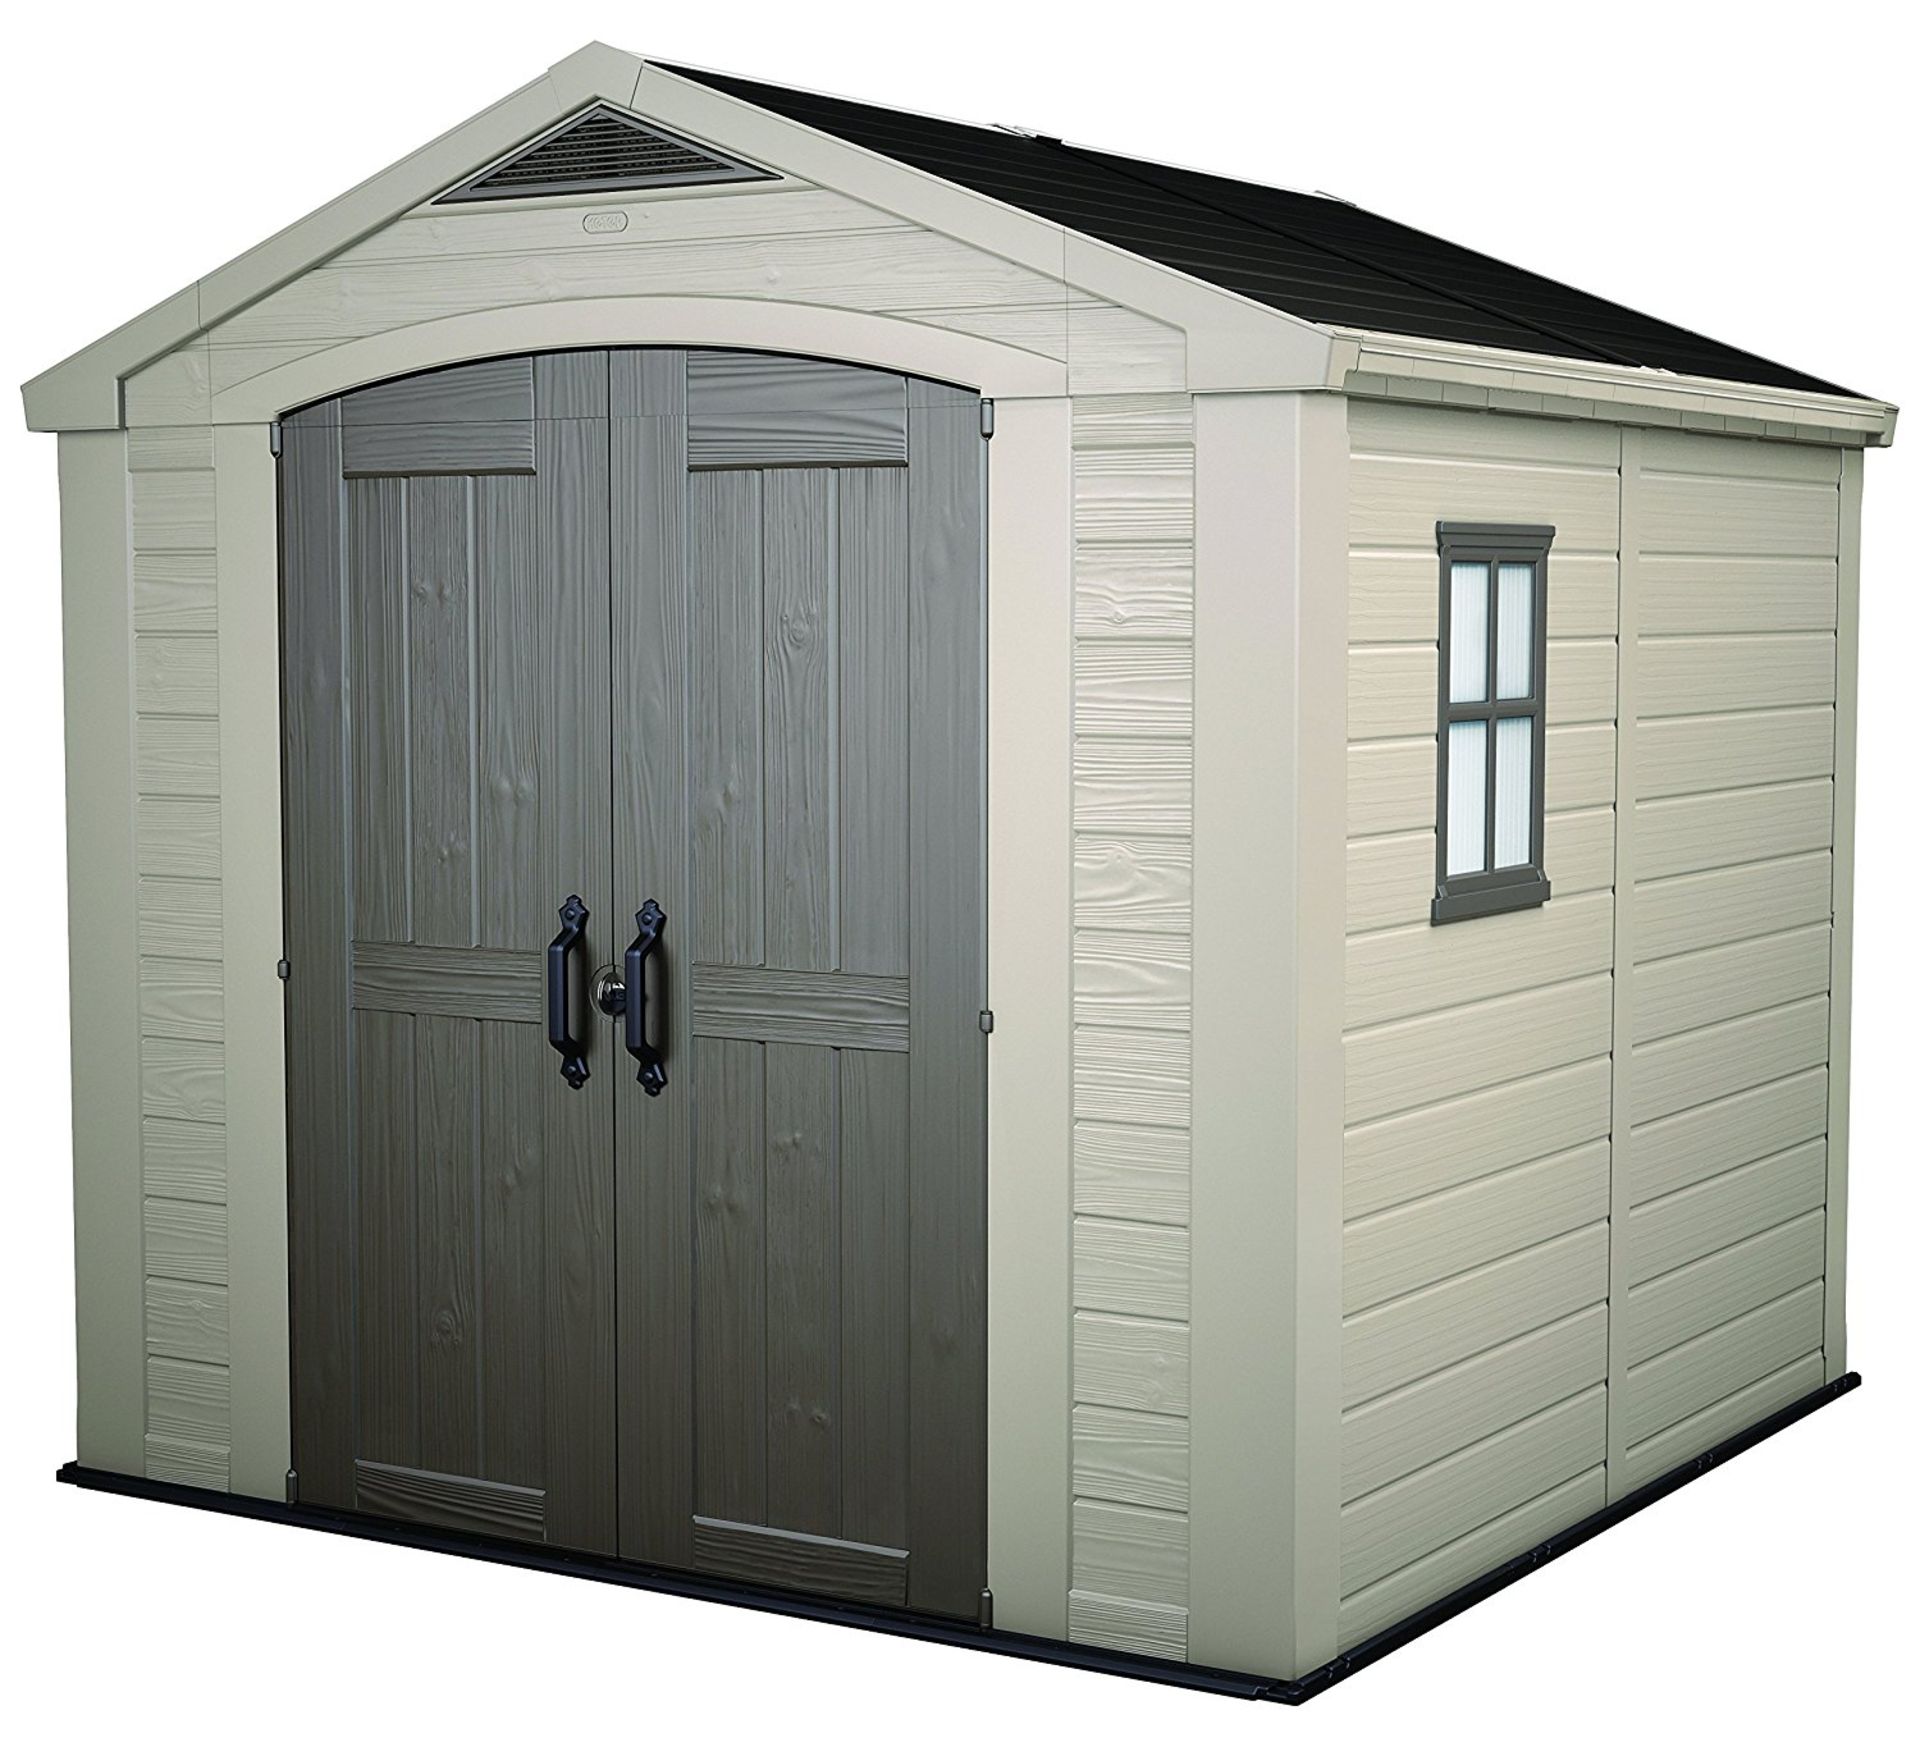 Keter Factor 8x8 shed - RRP £750 - Unboxed on Pallet